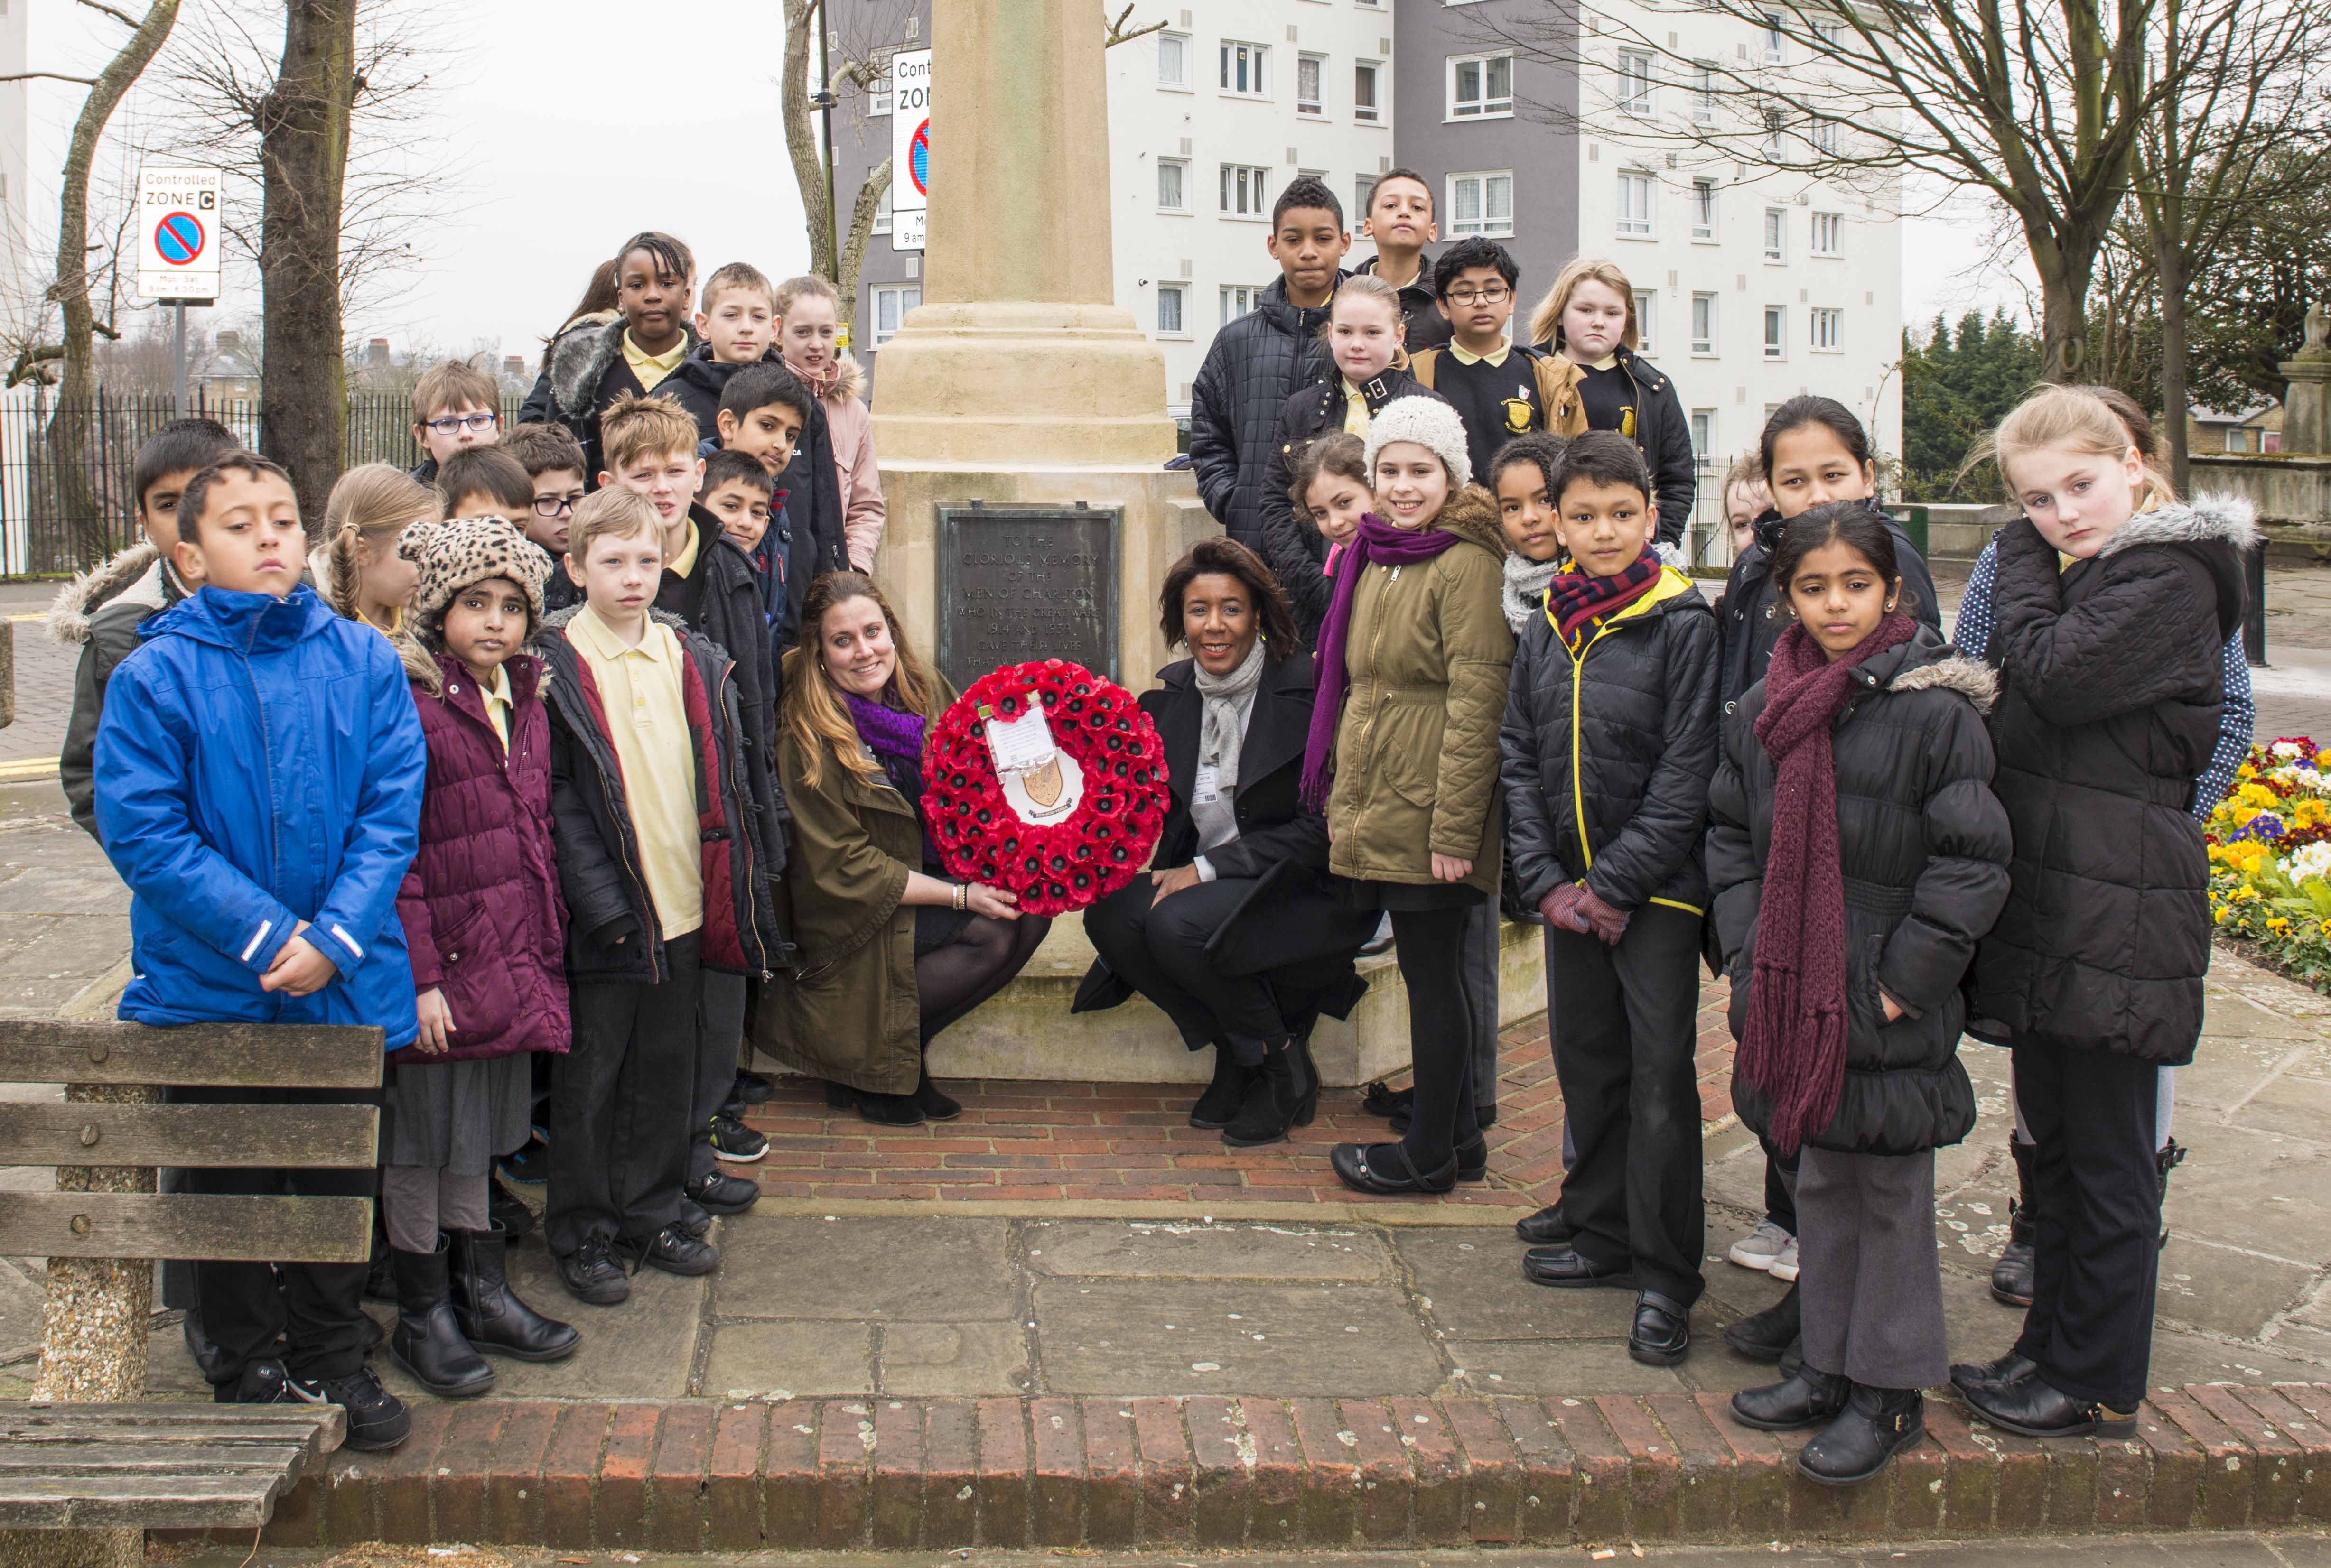 Children from Charlton Manor Primary School, Tiva Montalbano First World War Programme Manager at Historic England and Cllr Denise Scott-Mcdonald gather at the war memorial to lay a wreath.